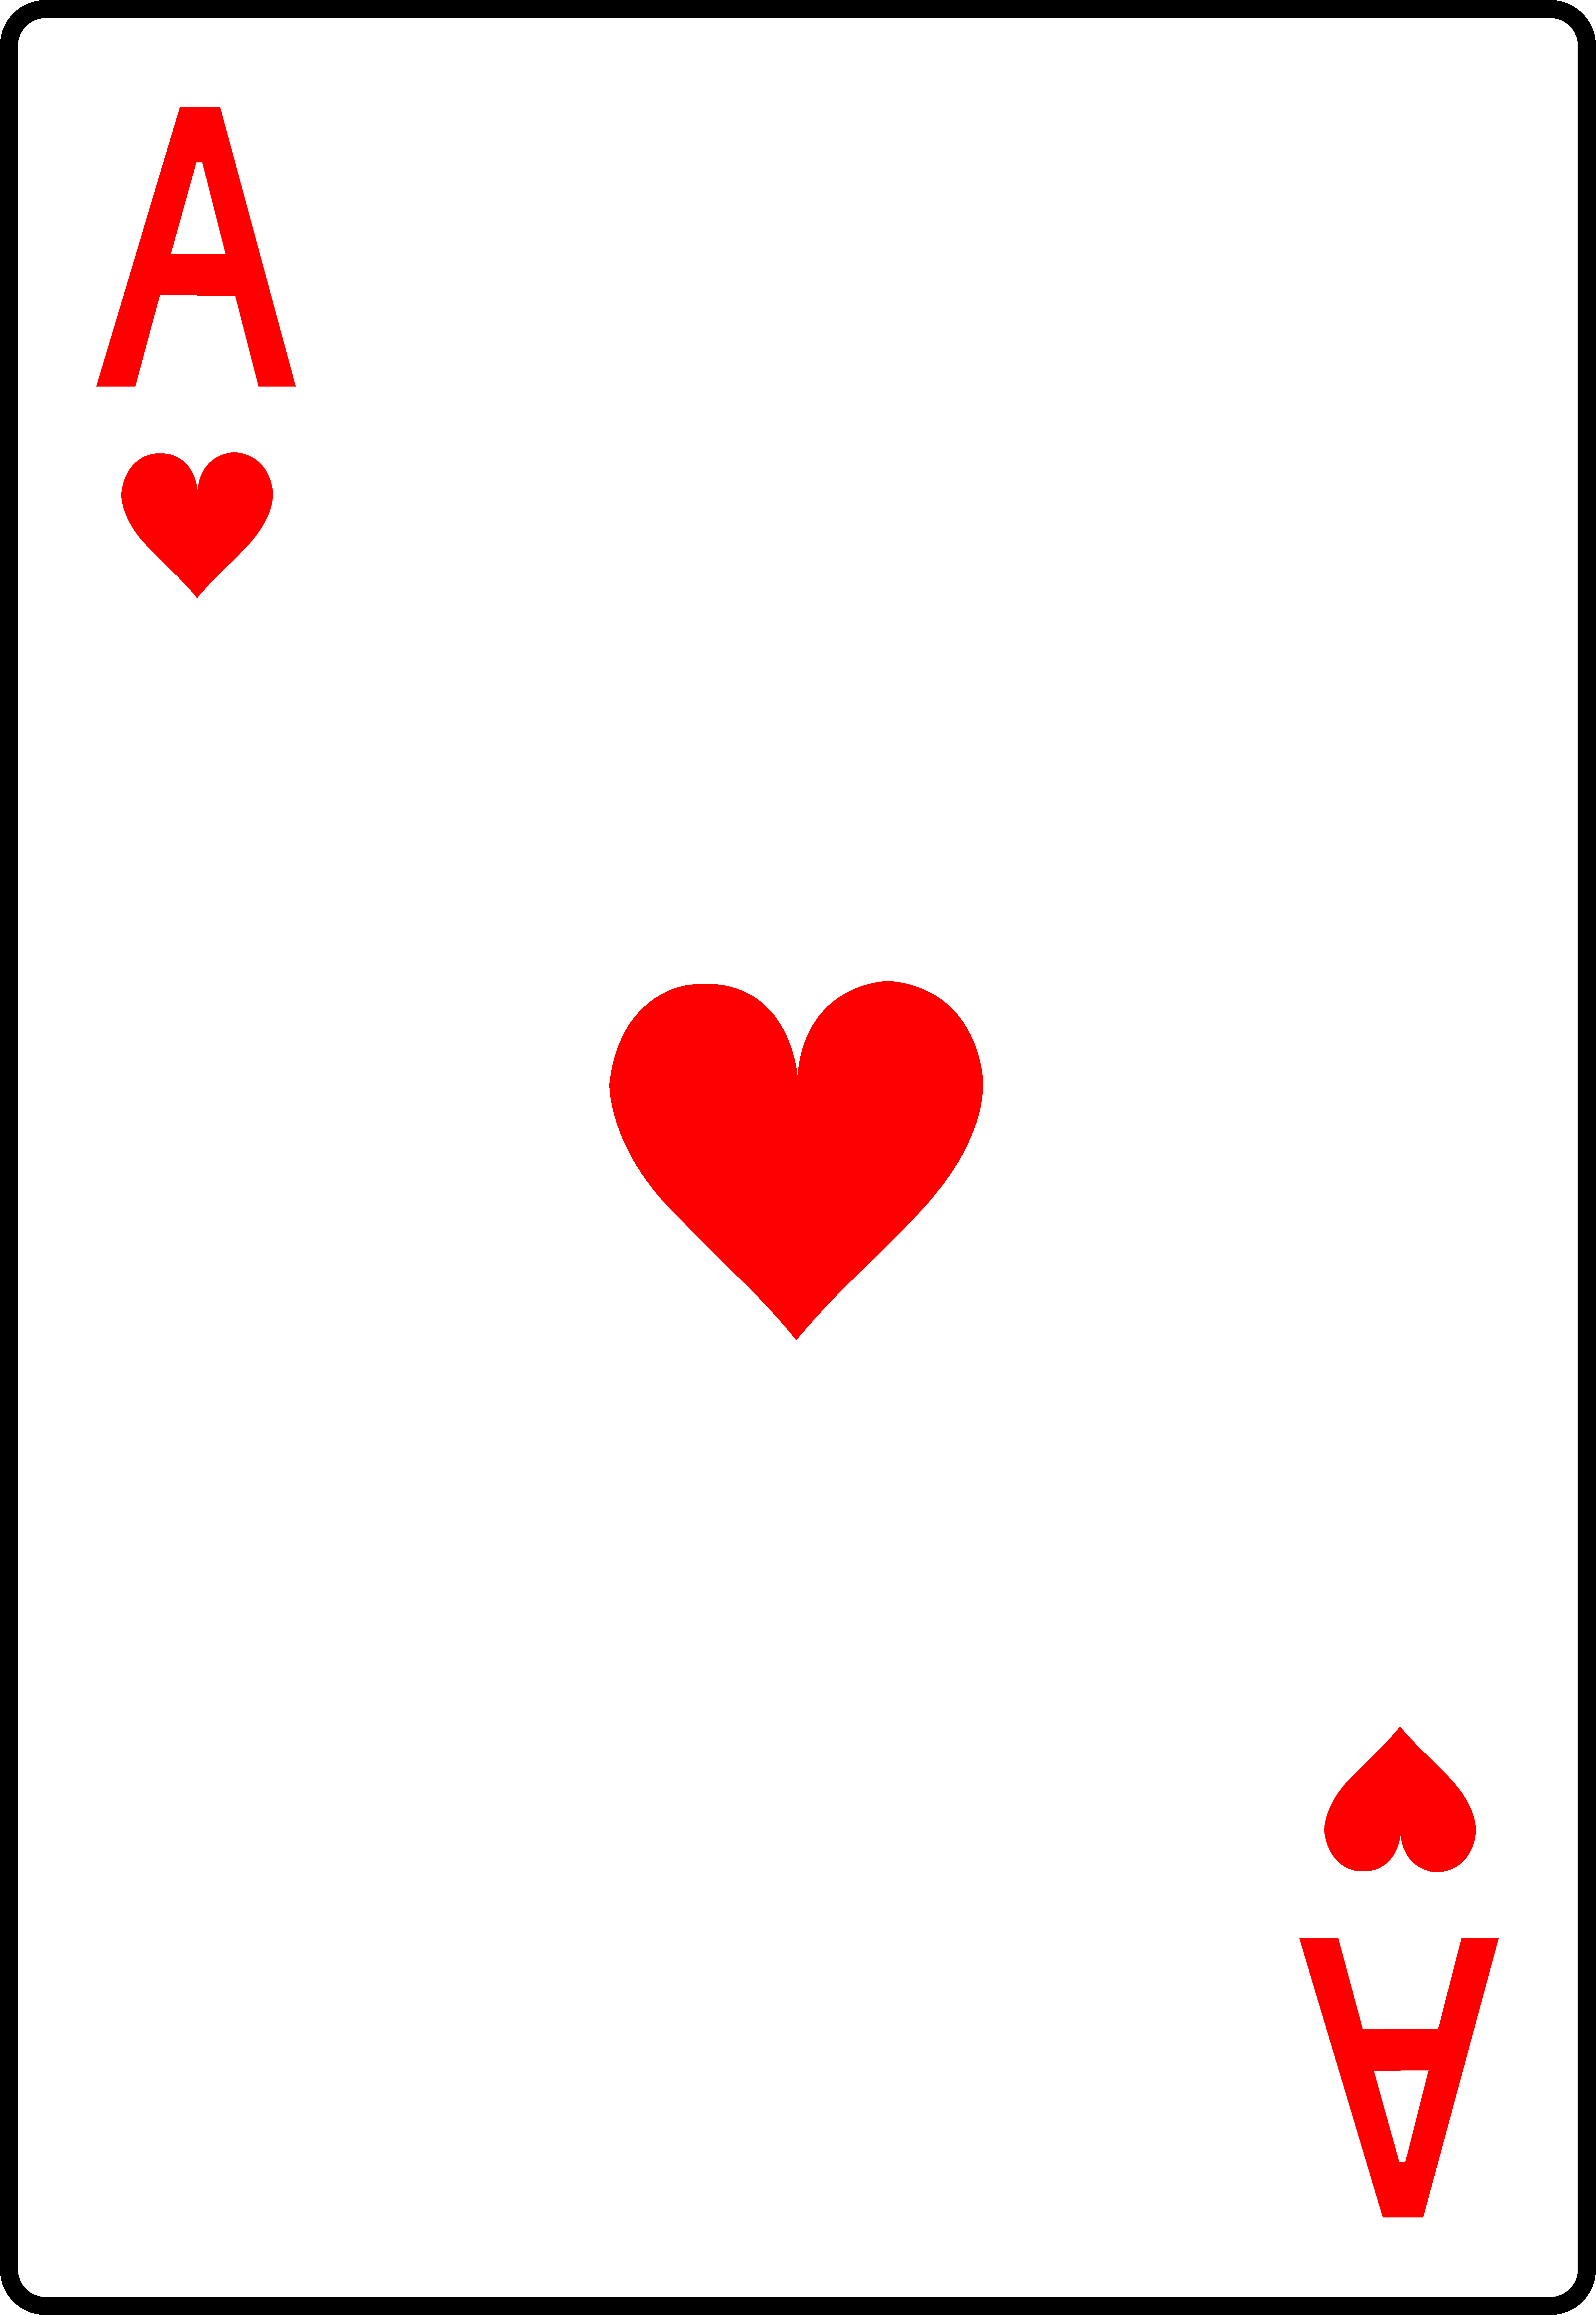 Ace of Hearts Playing Card.